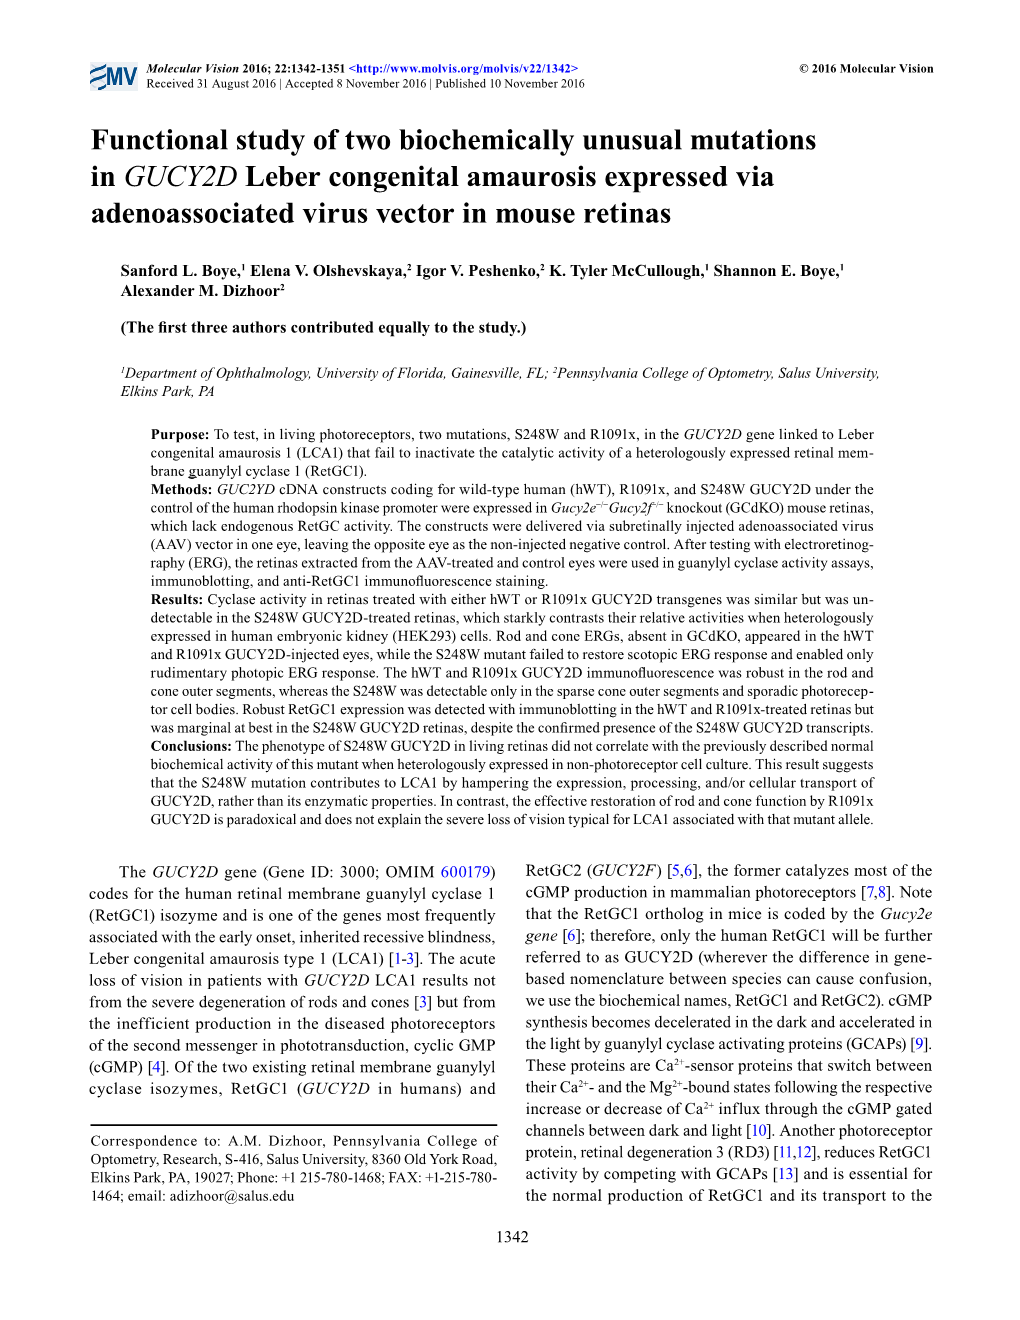 Functional Study of Two Biochemically Unusual Mutations in GUCY2D Leber Congenital Amaurosis Expressed Via Adenoassociated Virus Vector in Mouse Retinas